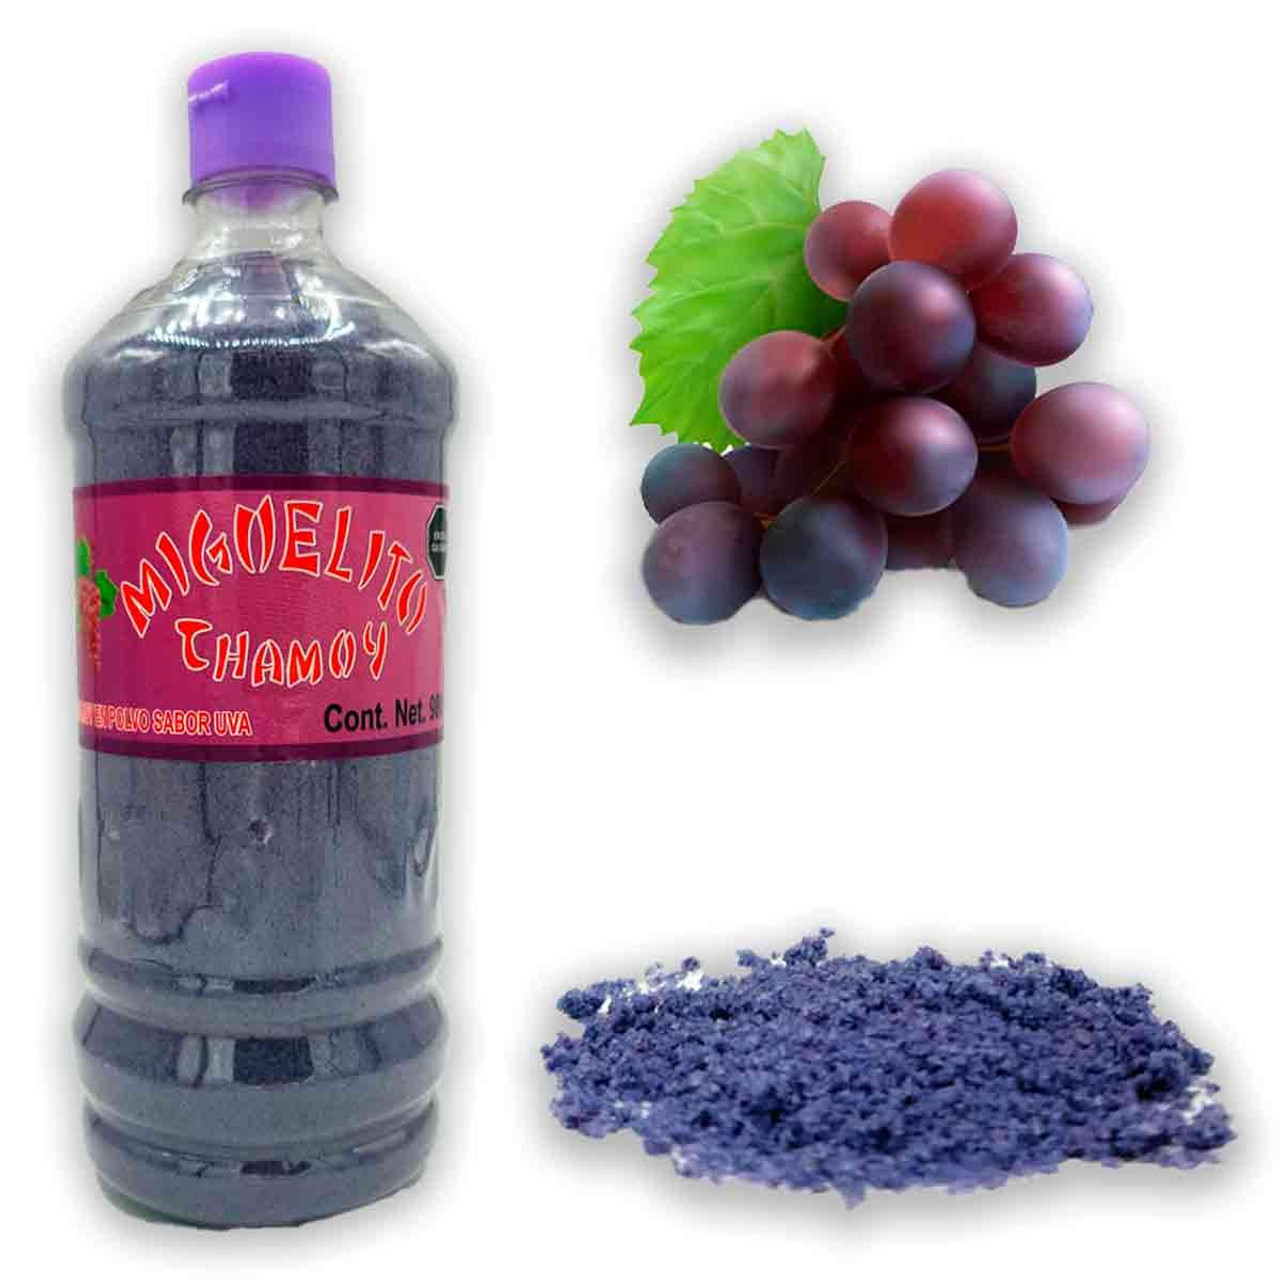 980 grams of delicious sugary and granulated powders with chamoy and grape flavors thet you can sprinkle in any kind of snack, fruit, vegetables or candies.